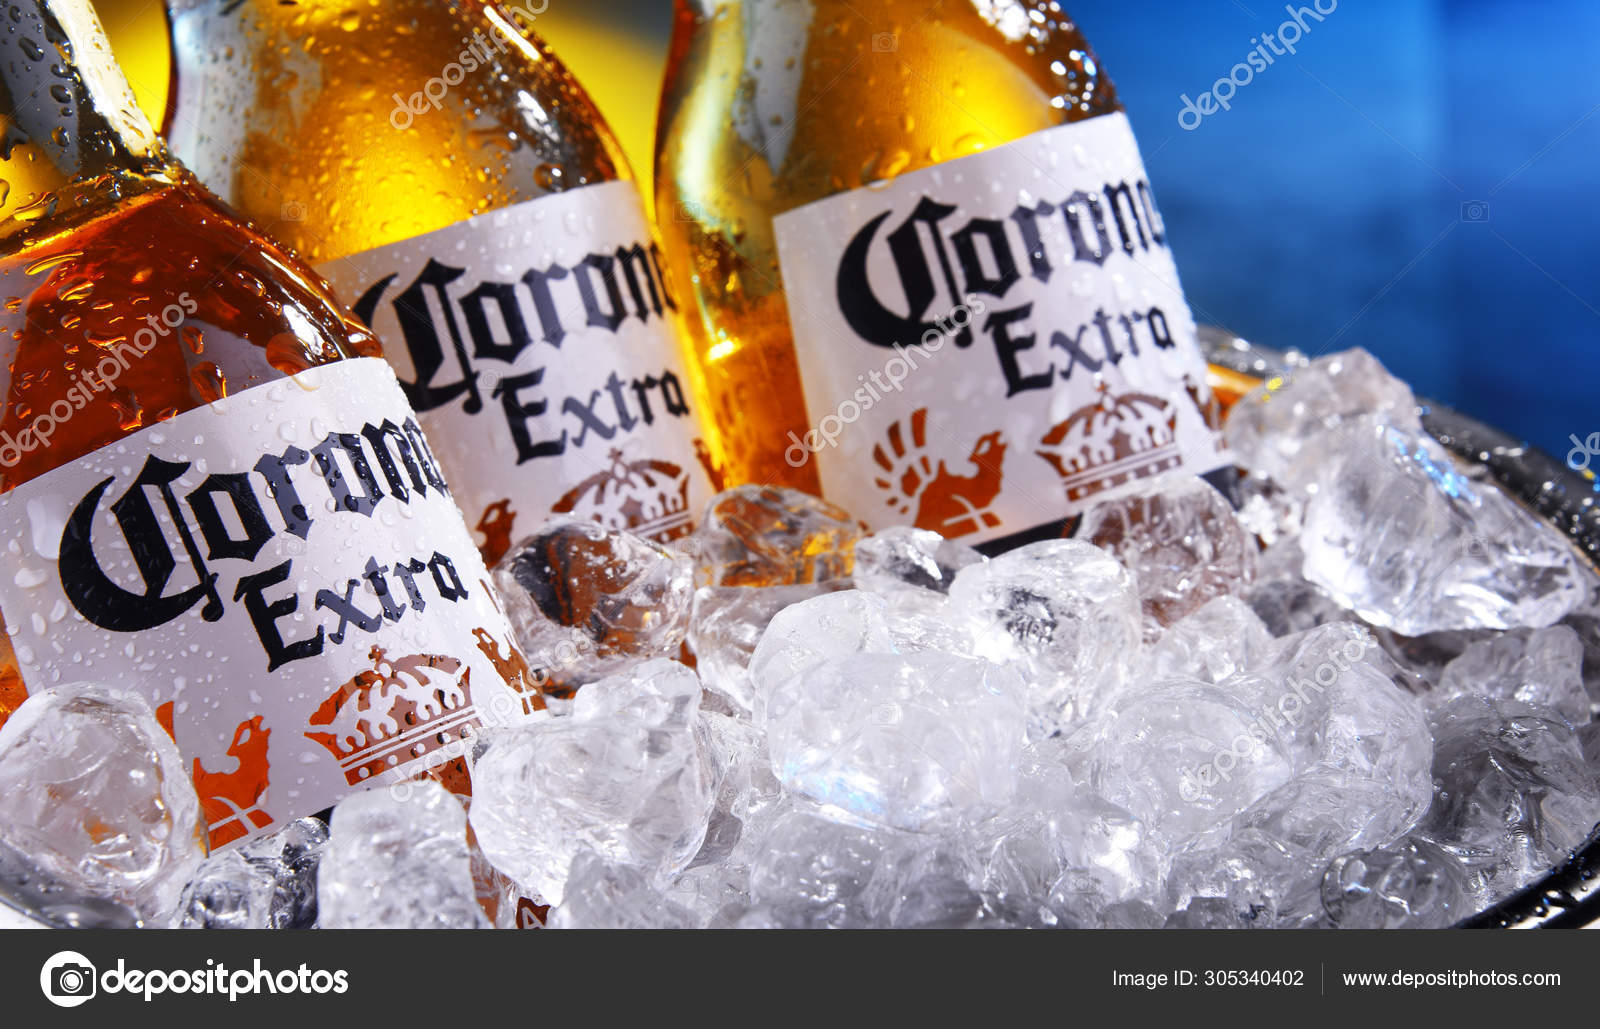 Bottles of Corona Extra beer in the with ice – Editorial Photo © monticello #305340402